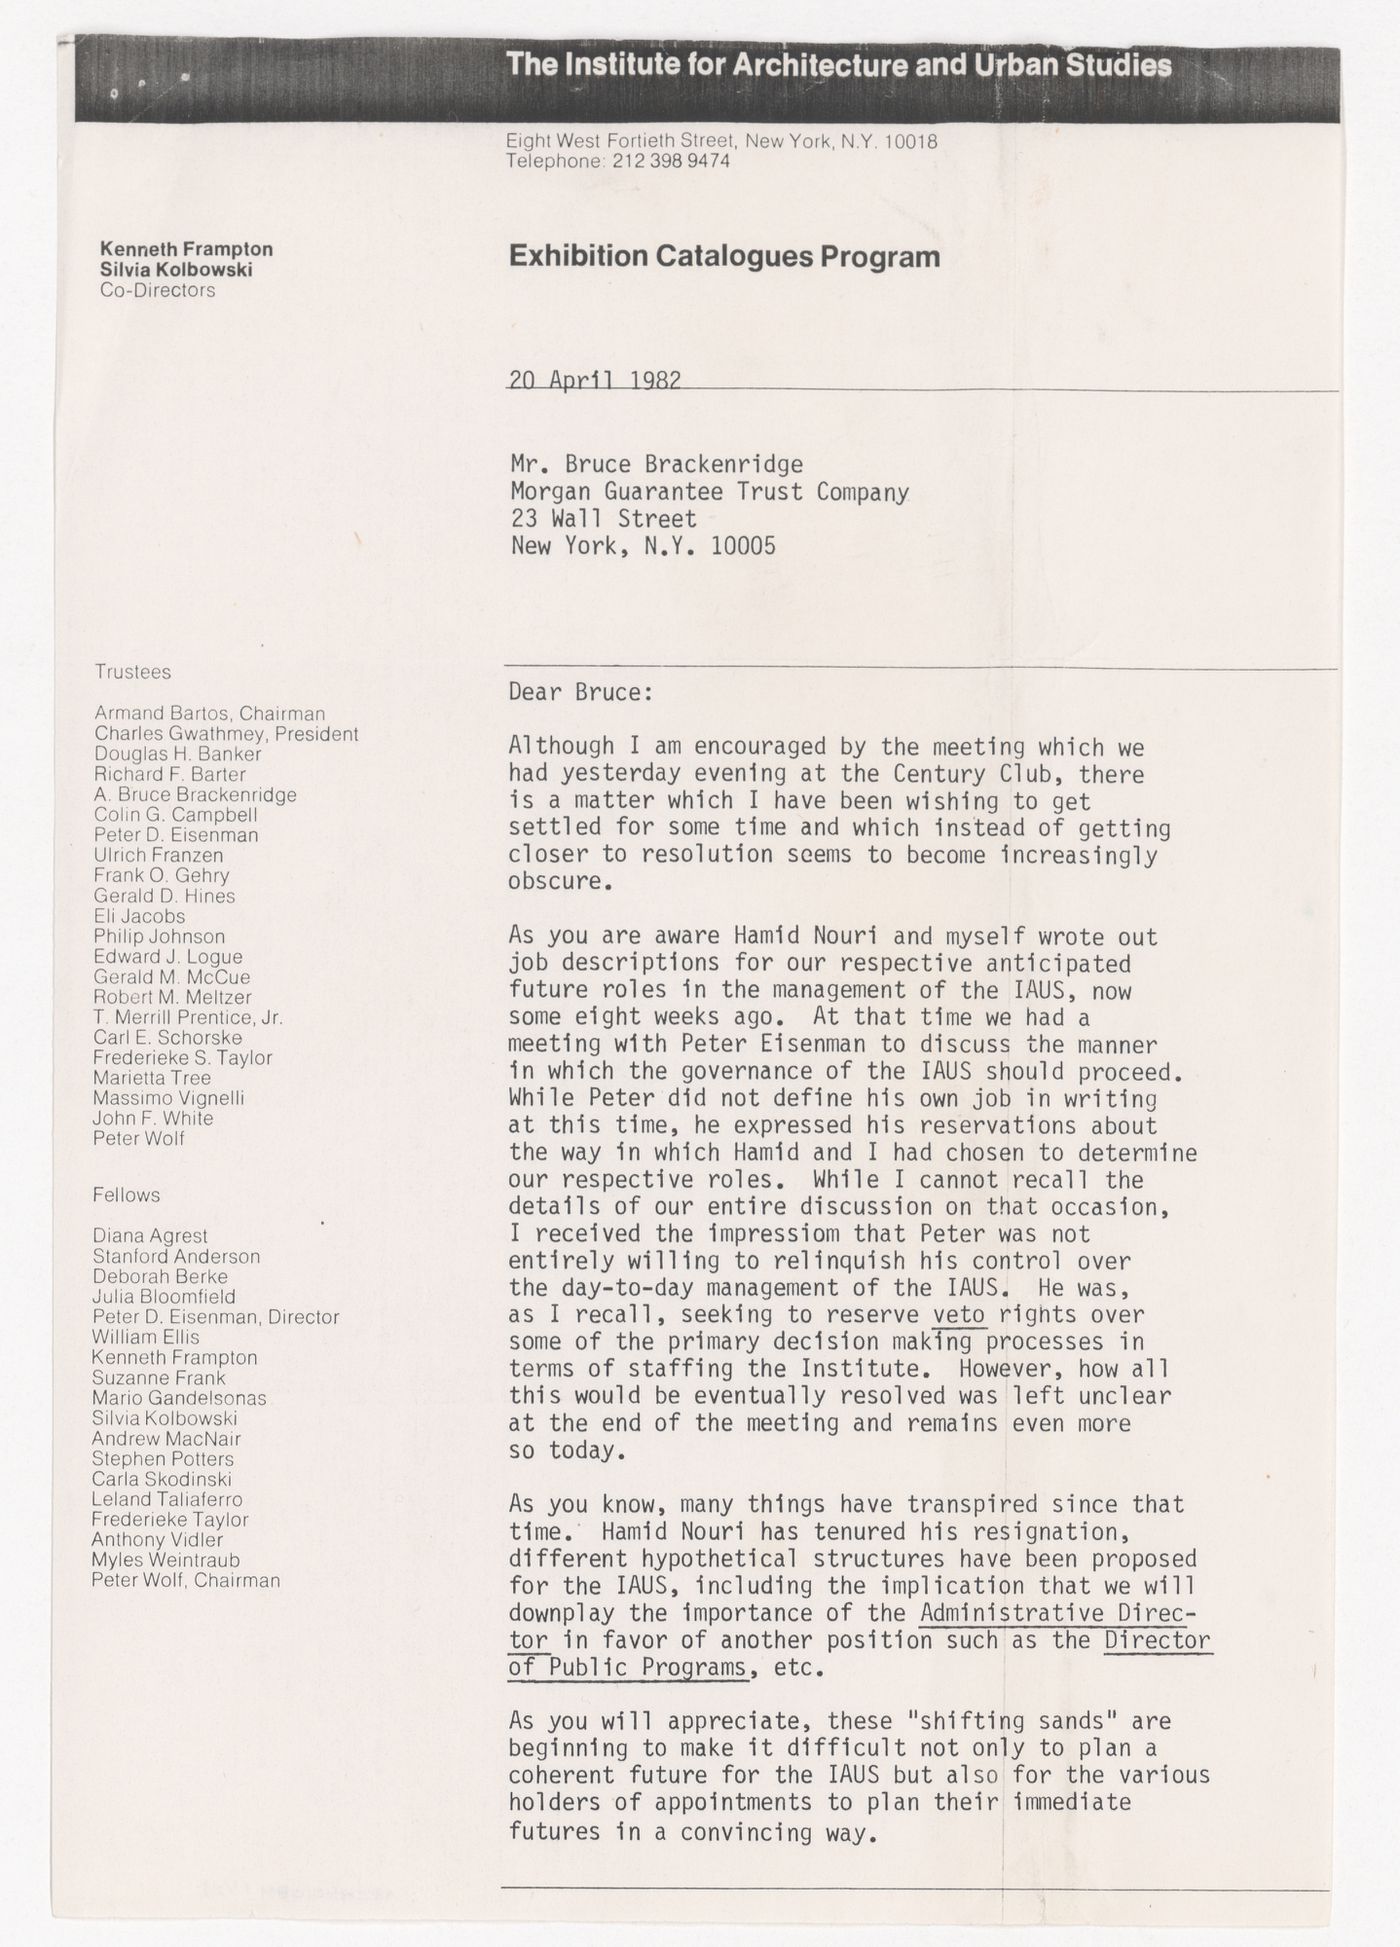 Letter from Kenneth Frampton to Bruce Brackenridge about Frampton's role in IAUS